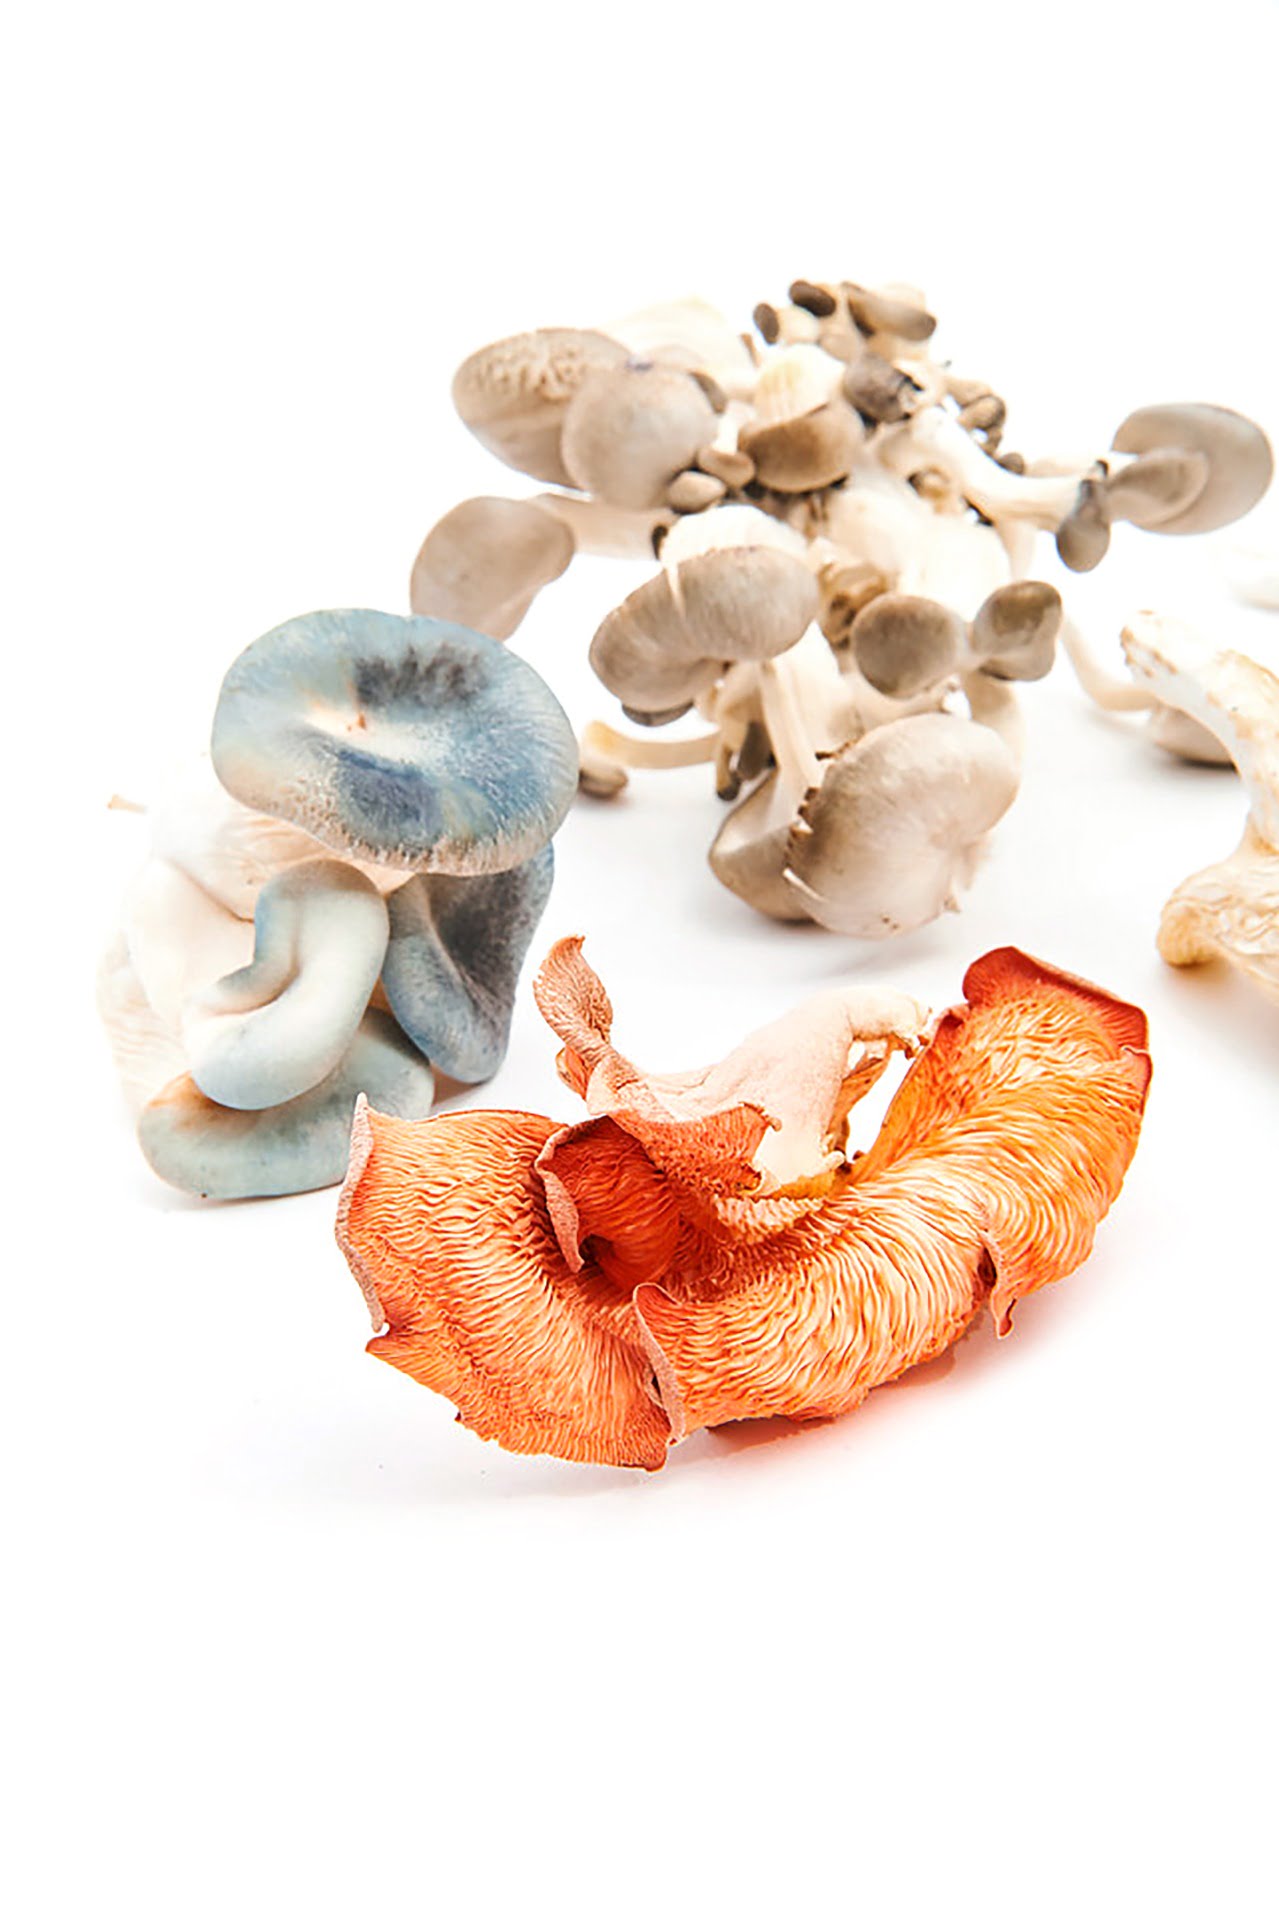 Urban Mushrooms YMCA Product Photography in Newcastle Kitchen 5